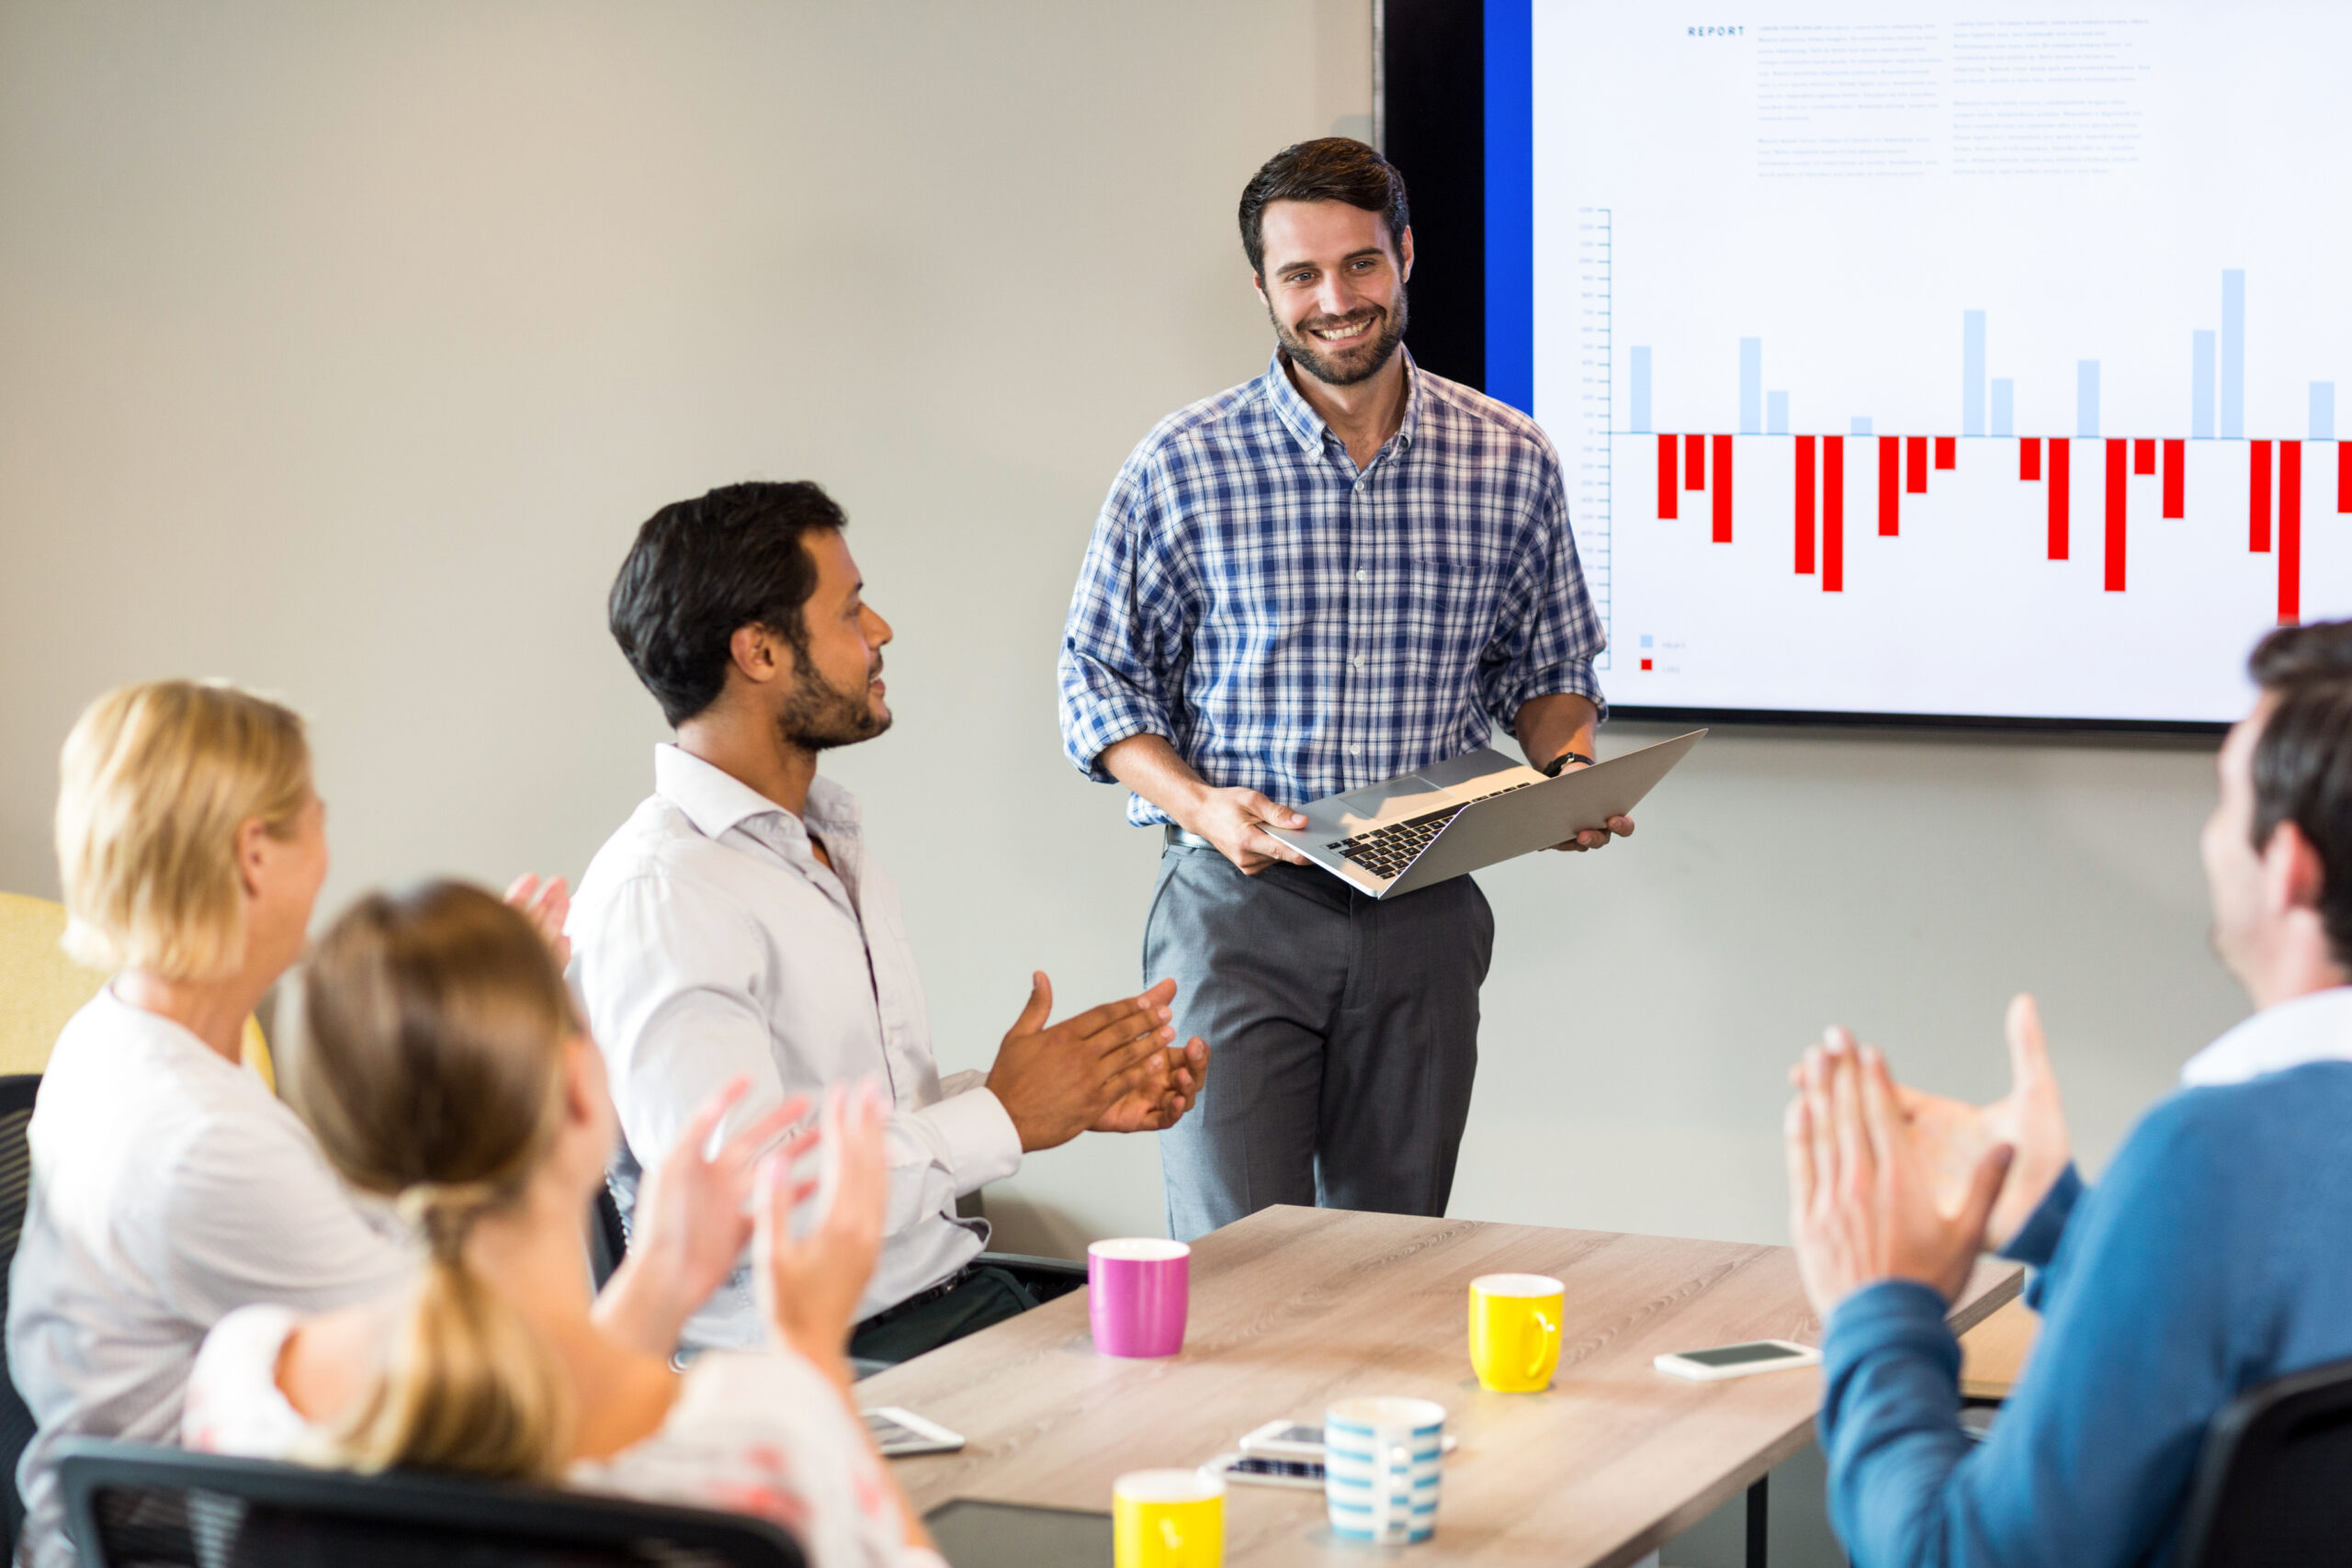 Presentation skills – just talking, winging or excited to the core